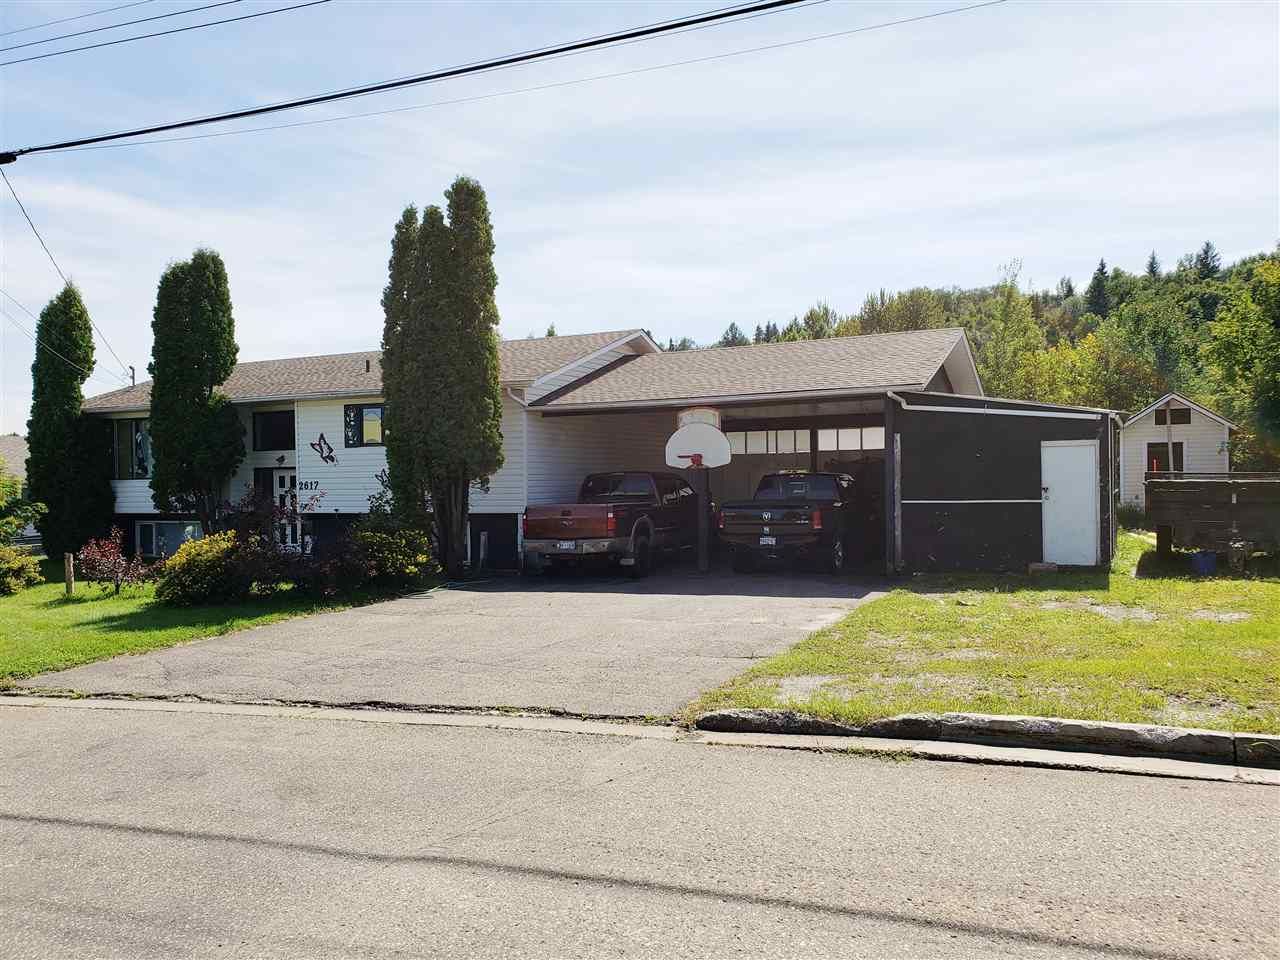 Main Photo: 2617 PETERSEN Road in Prince George: Peden Hill House for sale (PG City West (Zone 71))  : MLS®# R2489559